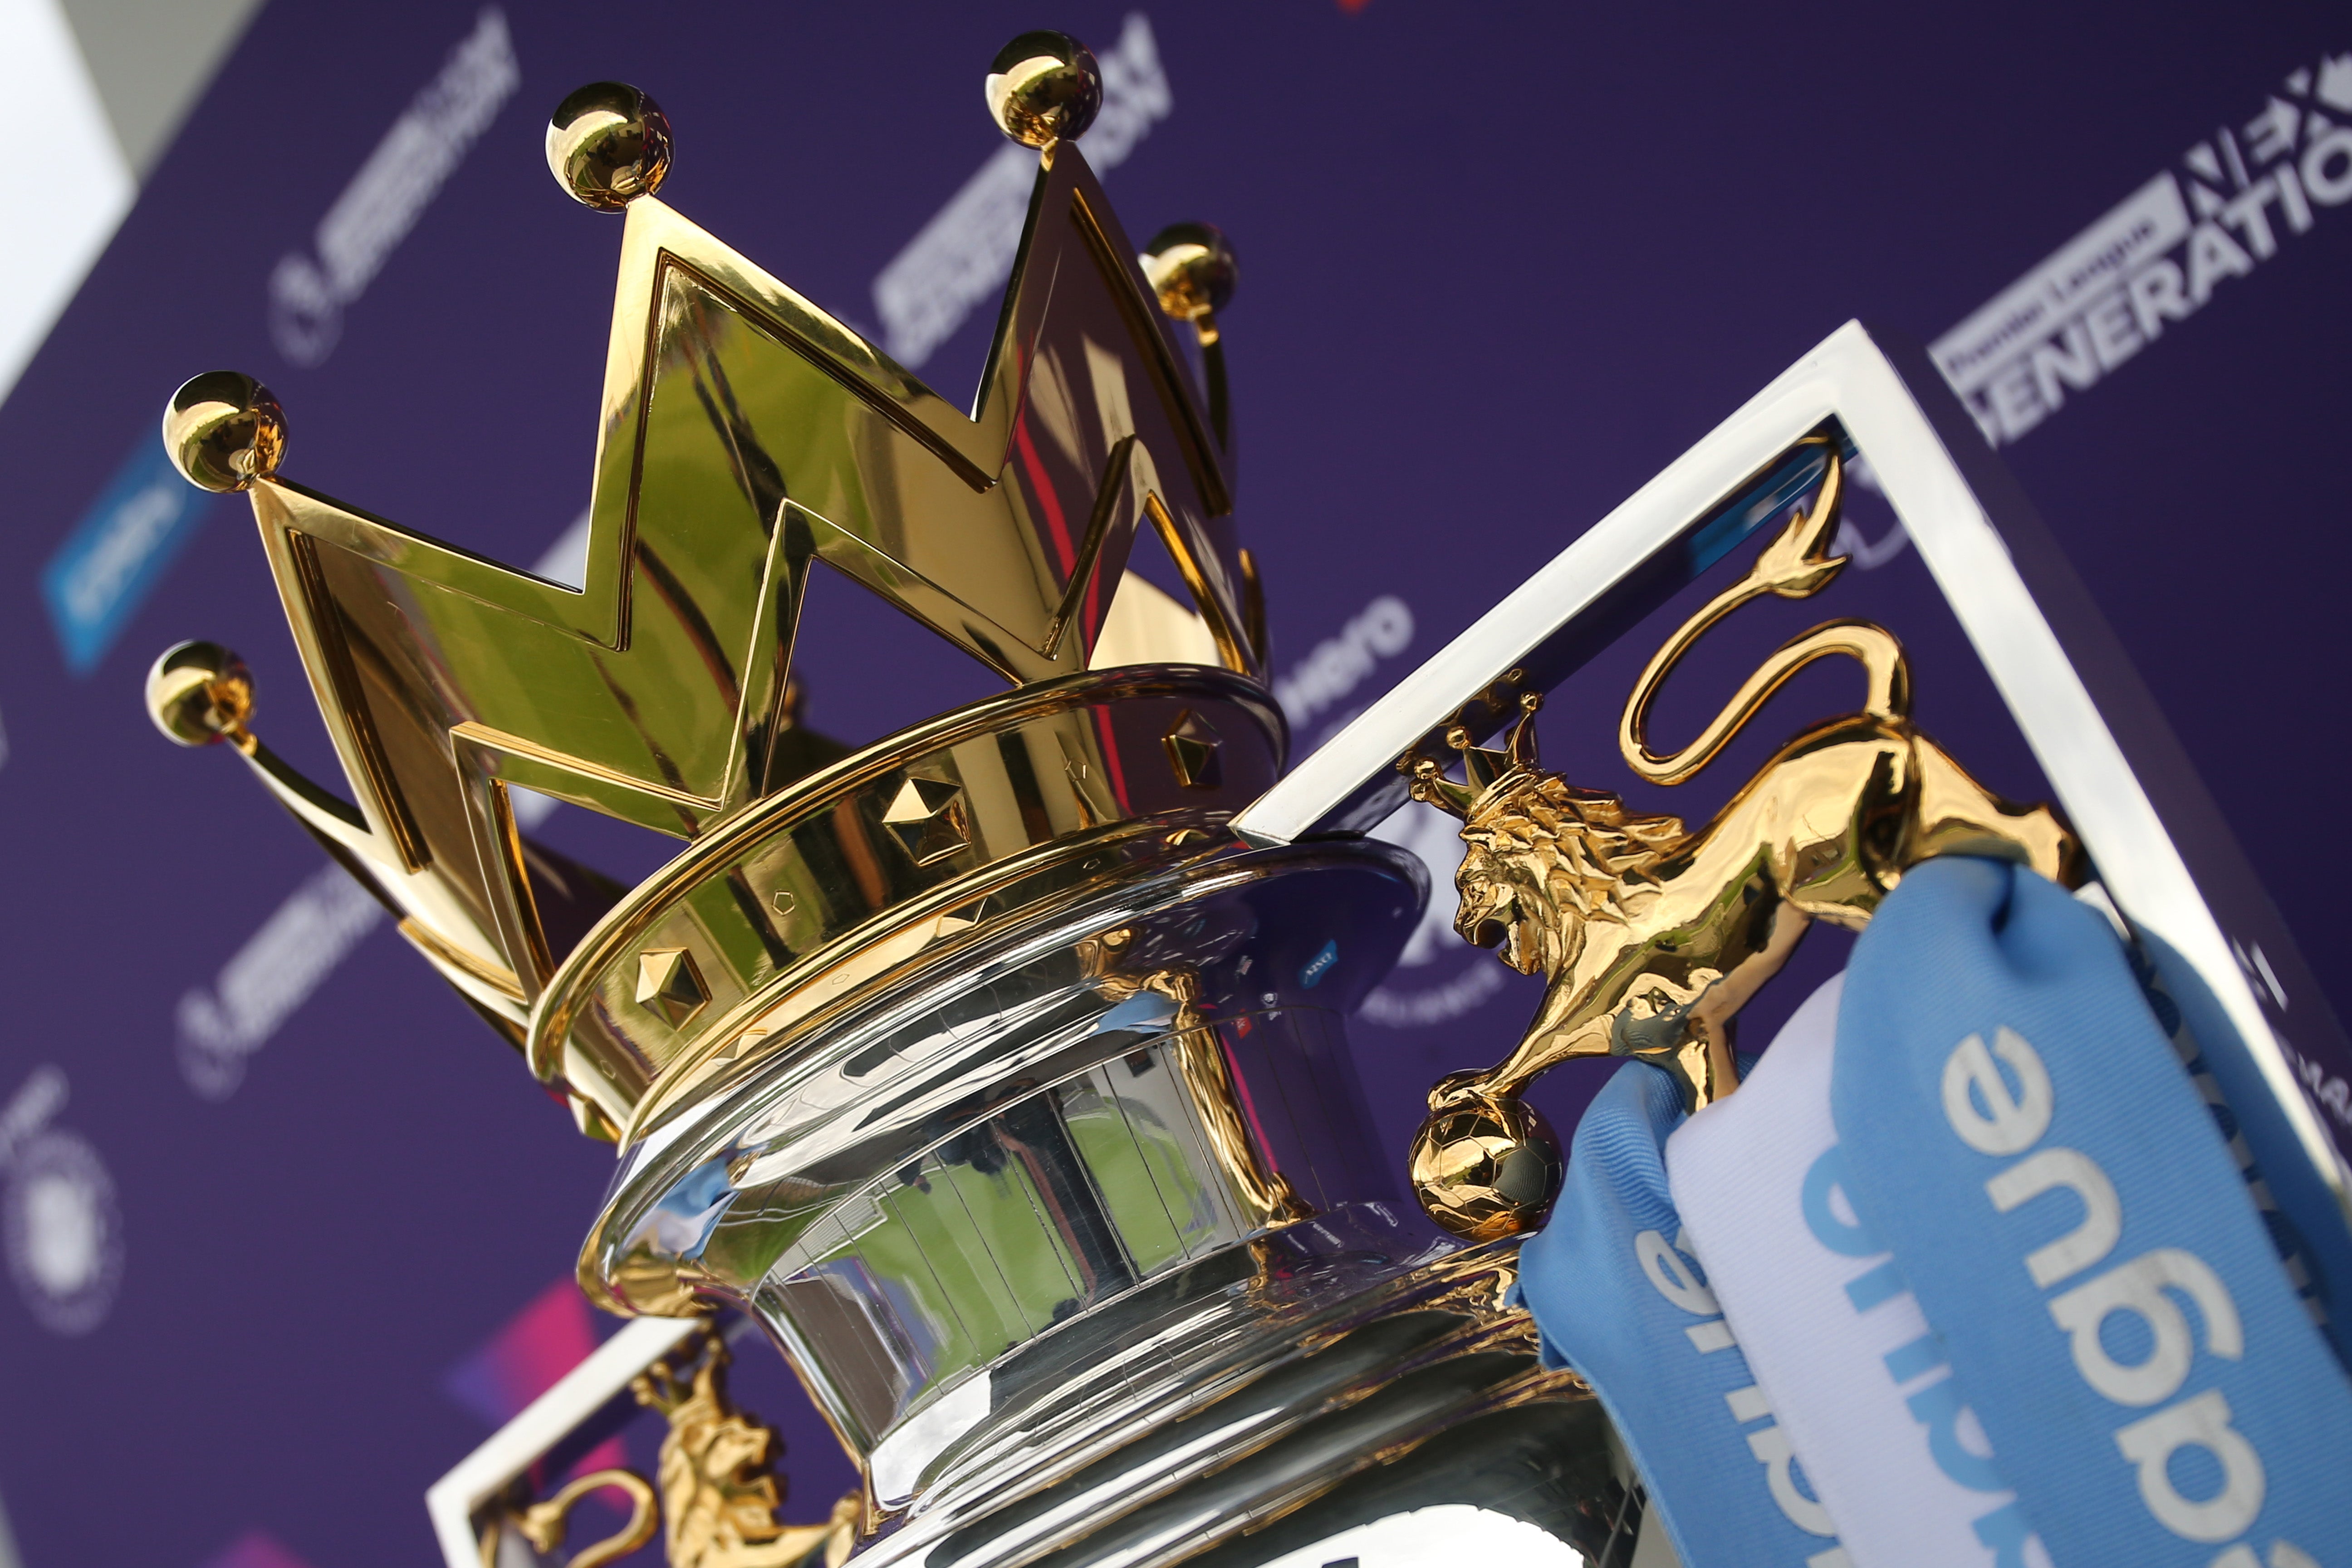 The Premier League could modify the current Profit and Sustainability Rules